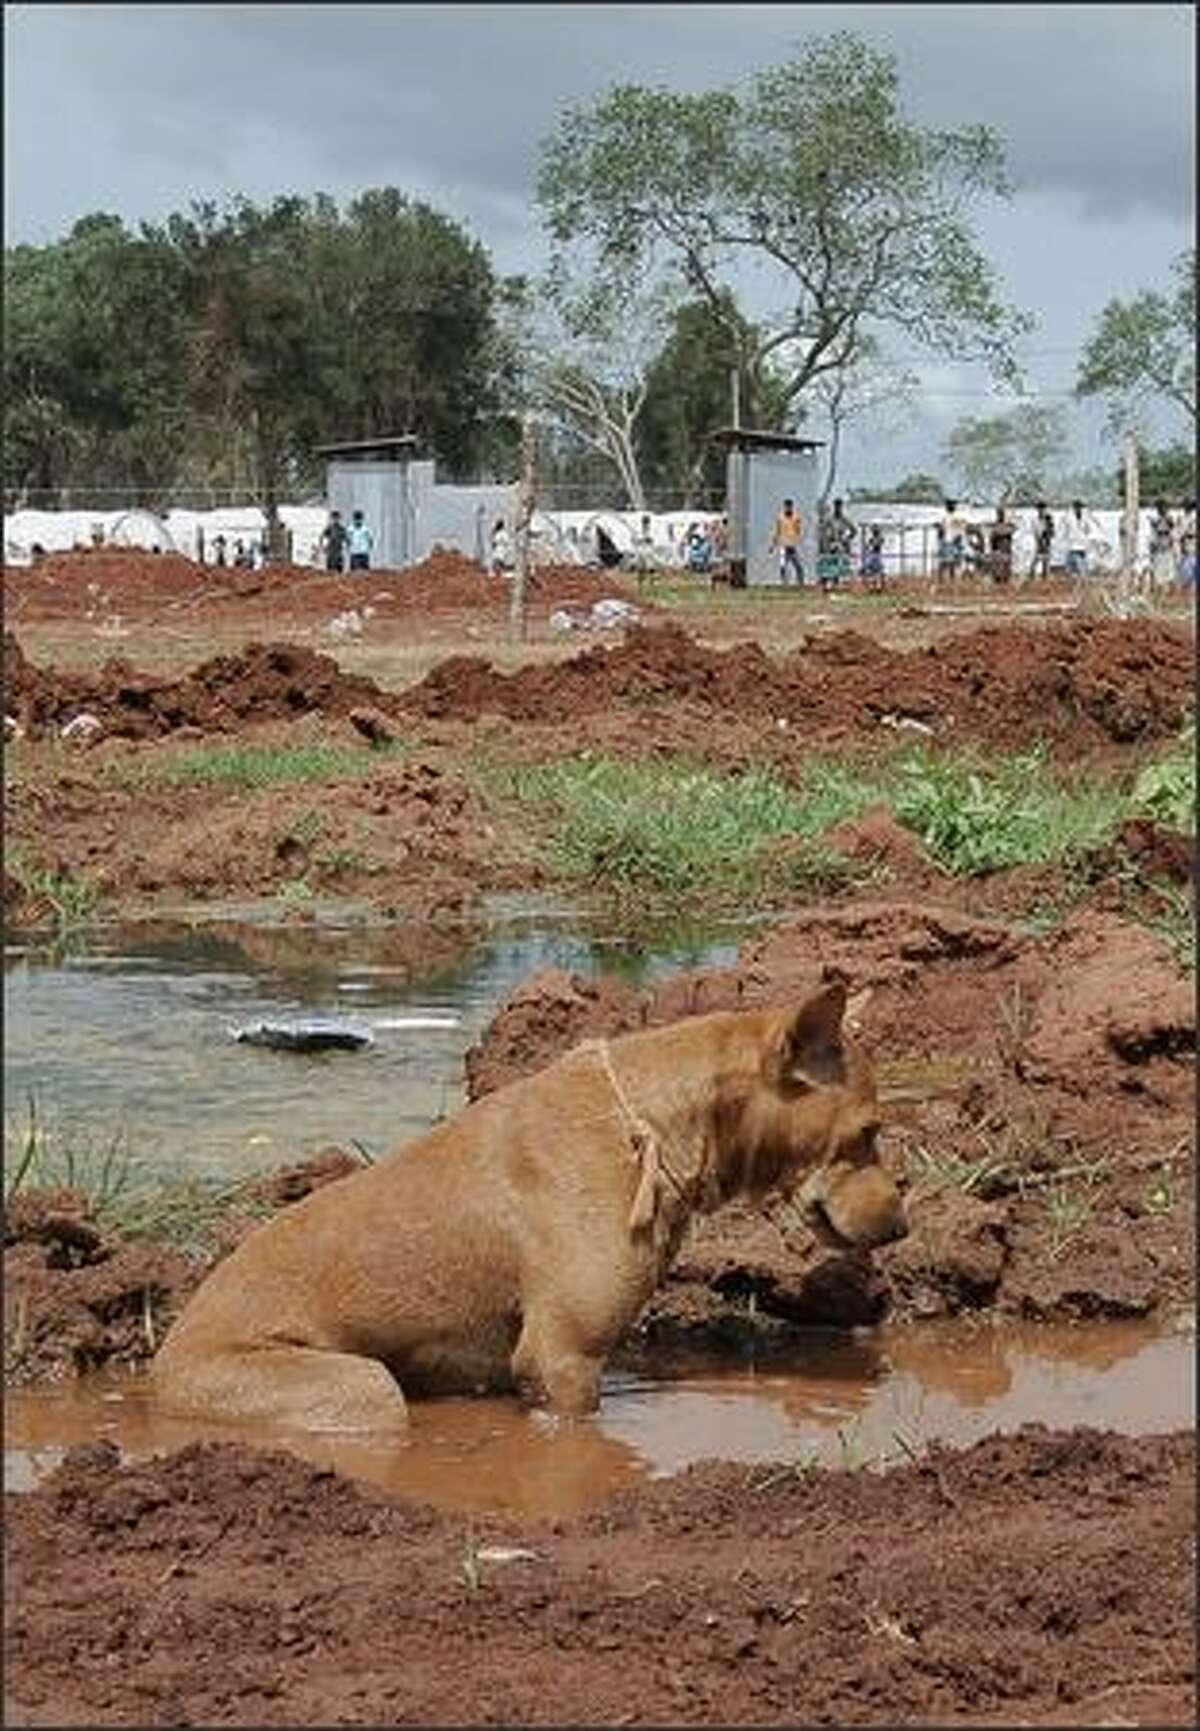 A dog cools off in a puddle of water at the Menik Farm refugee camp in Cheddikulam. UN Secretary-General Ban Ki-moon came face-to-face May 23 with the despair of Sri Lanka's war-hit civilians as he toured the nation's biggest refugee complex, home to 200,000 displaced by fighting.